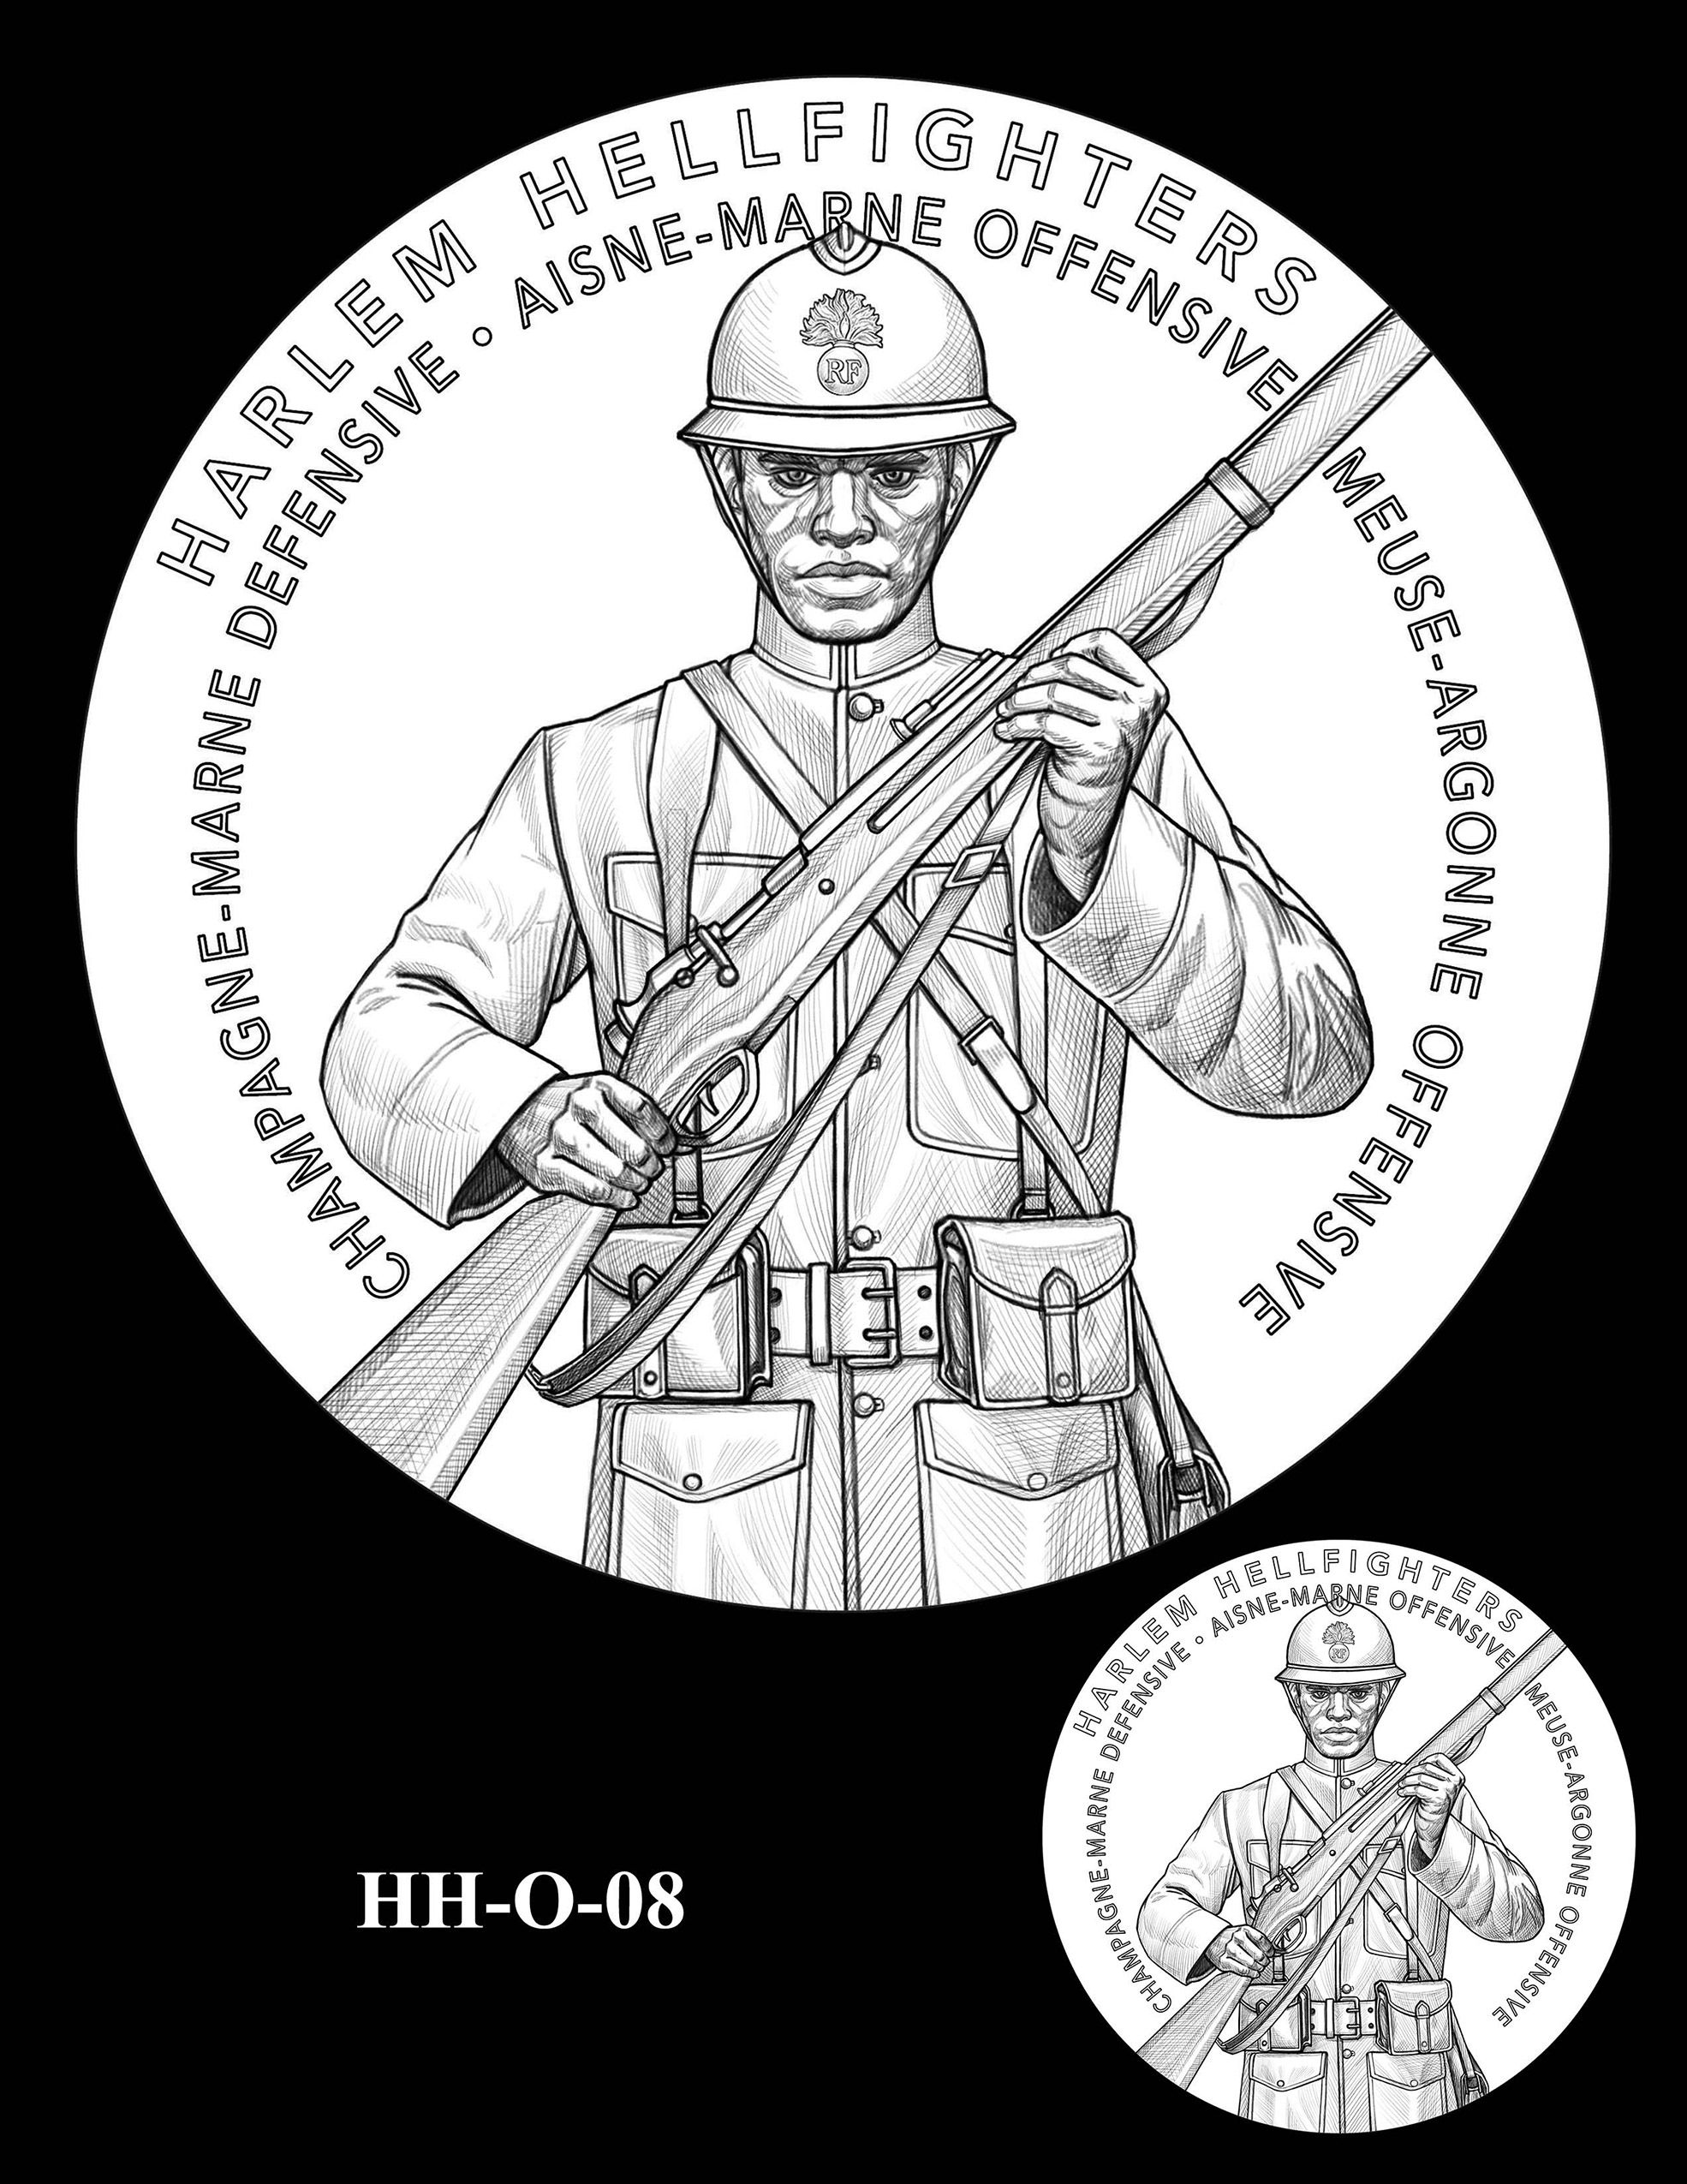 HH-O-08 -- Harlem Hellfighters Congressional Gold Medal